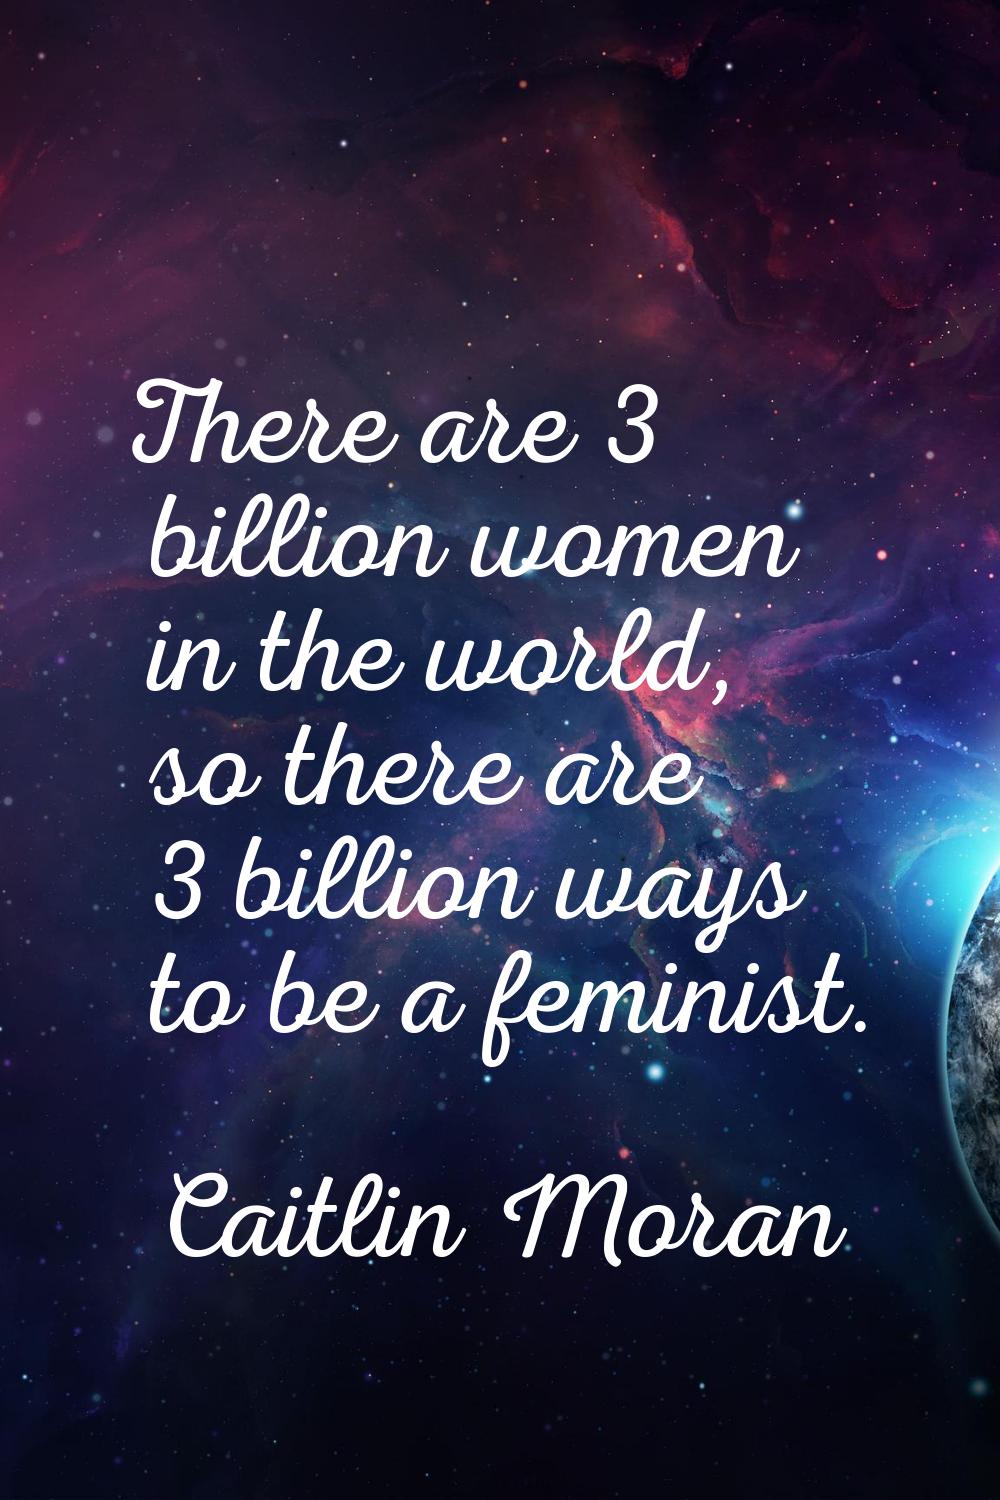 There are 3 billion women in the world, so there are 3 billion ways to be a feminist.